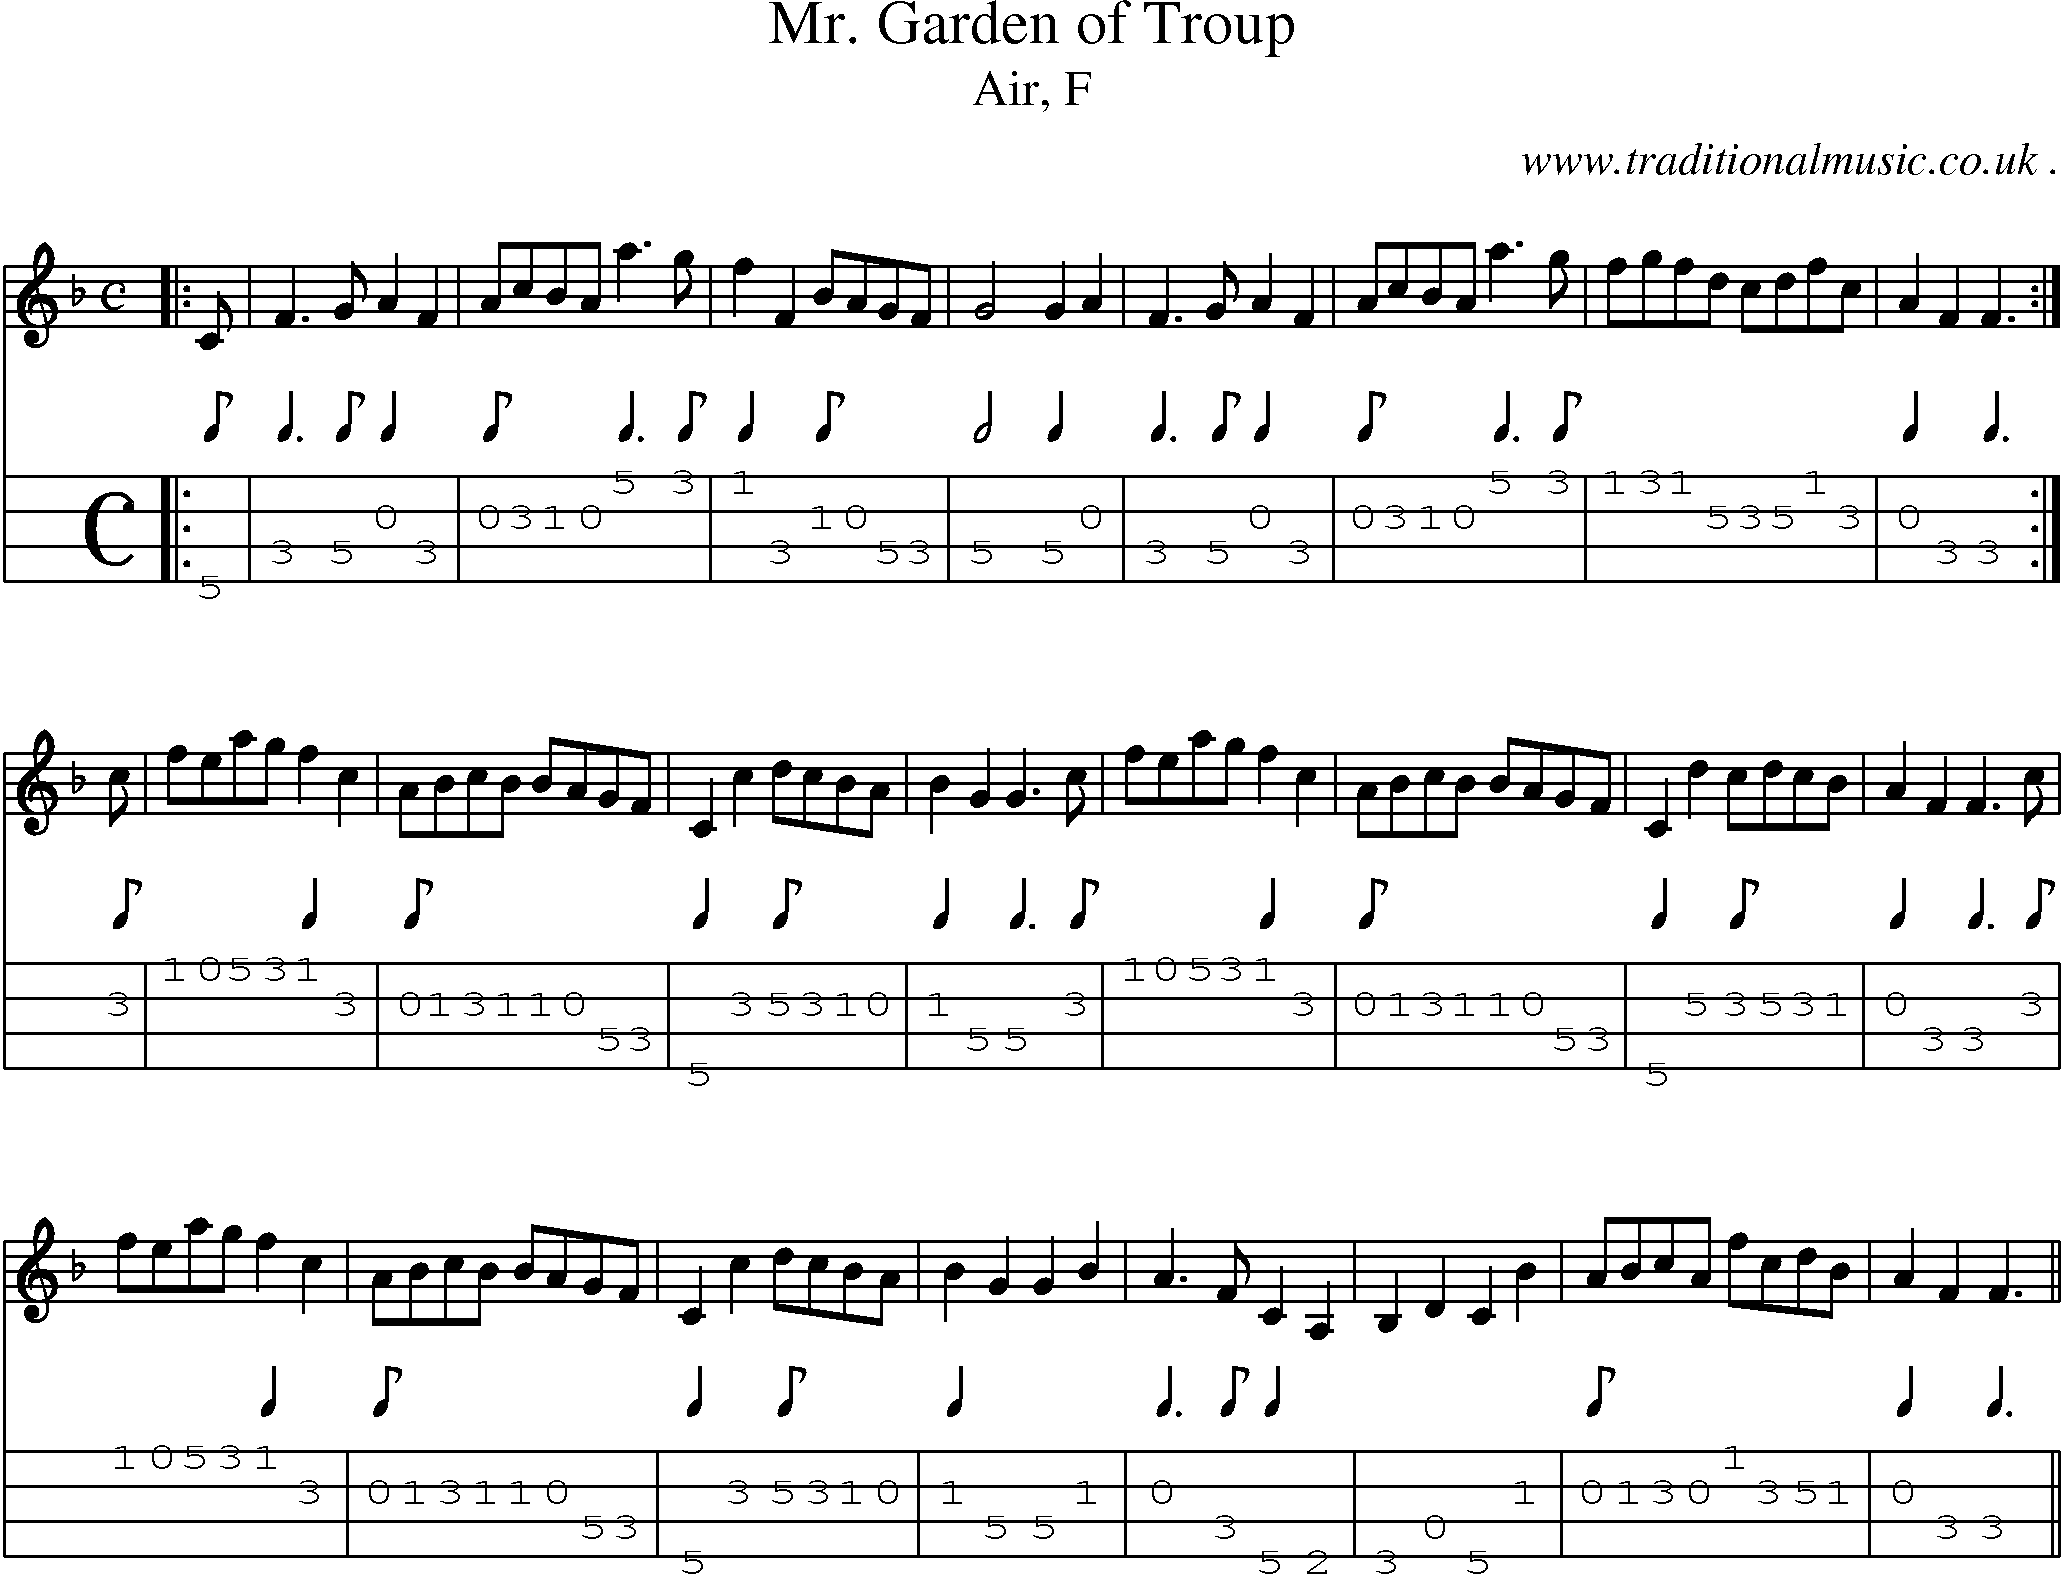 Sheet-music  score, Chords and Mandolin Tabs for Mr Garden Of Troup